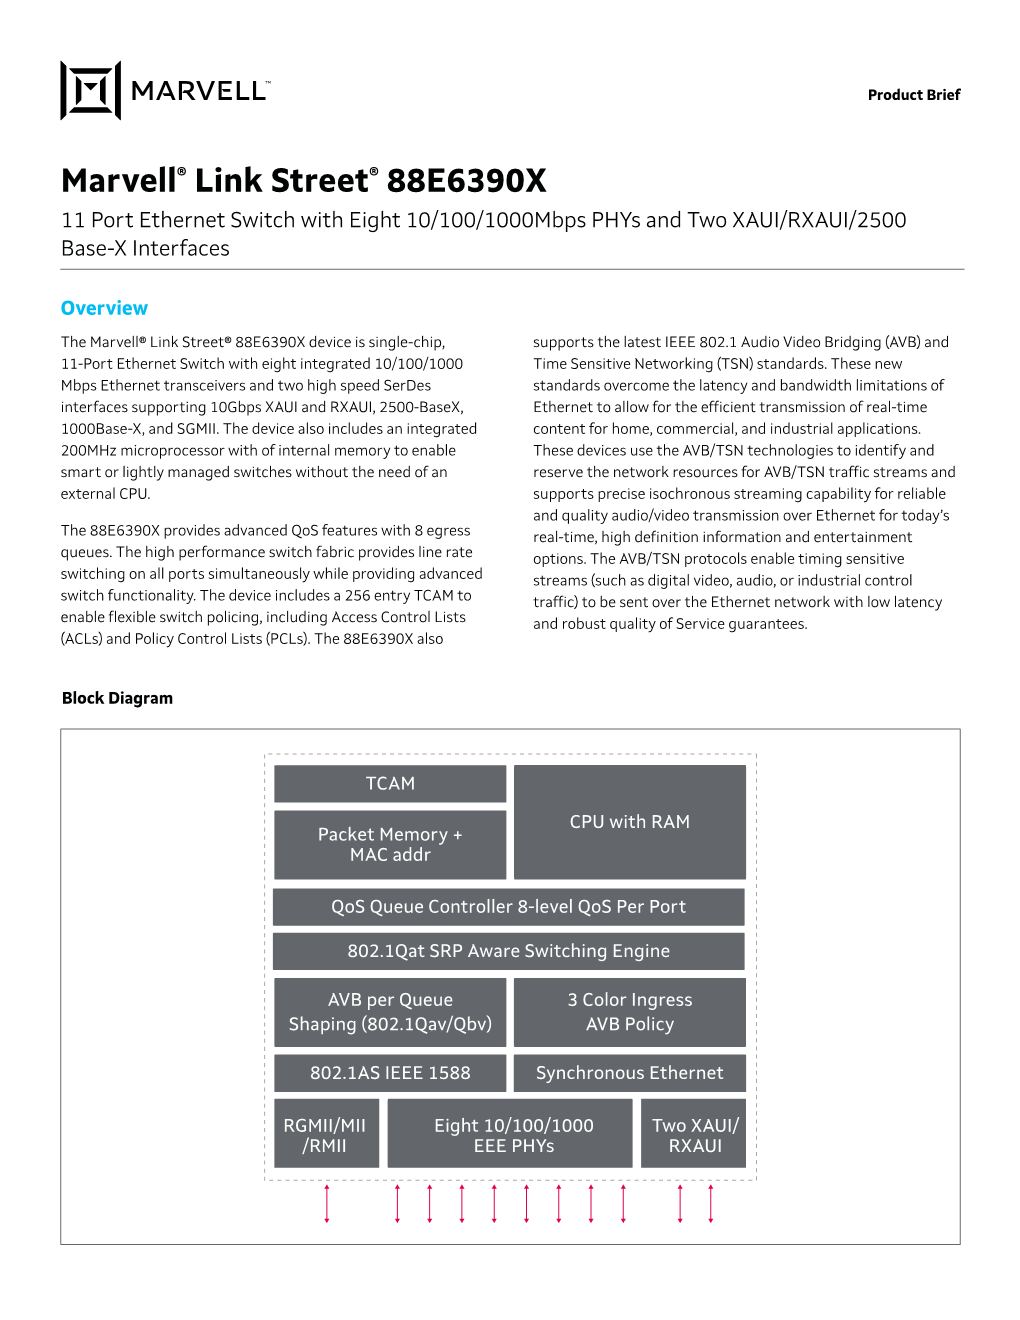 Marvell® Link Street® 88E6390X 11 Port Ethernet Switch with Eight 10/100/1000Mbps Phys and Two XAUI/RXAUI/2500 Base-X Interfaces